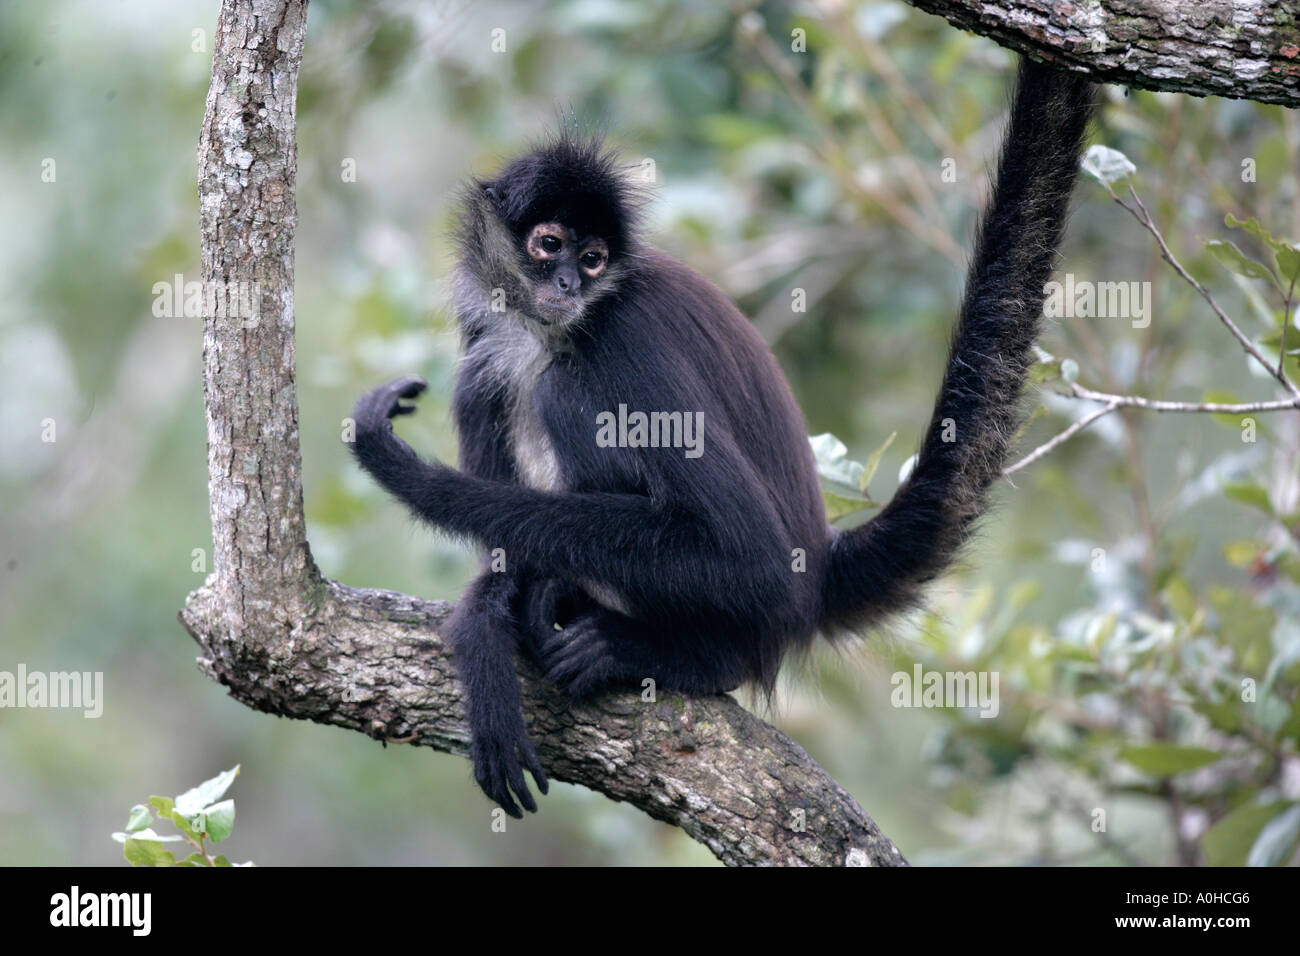 CENTRAL AMERICAN SPIDER MONKEY OR GEOFFRY S SPIDER MONKEY Ateles geoffroyi In Belize Stock Photo